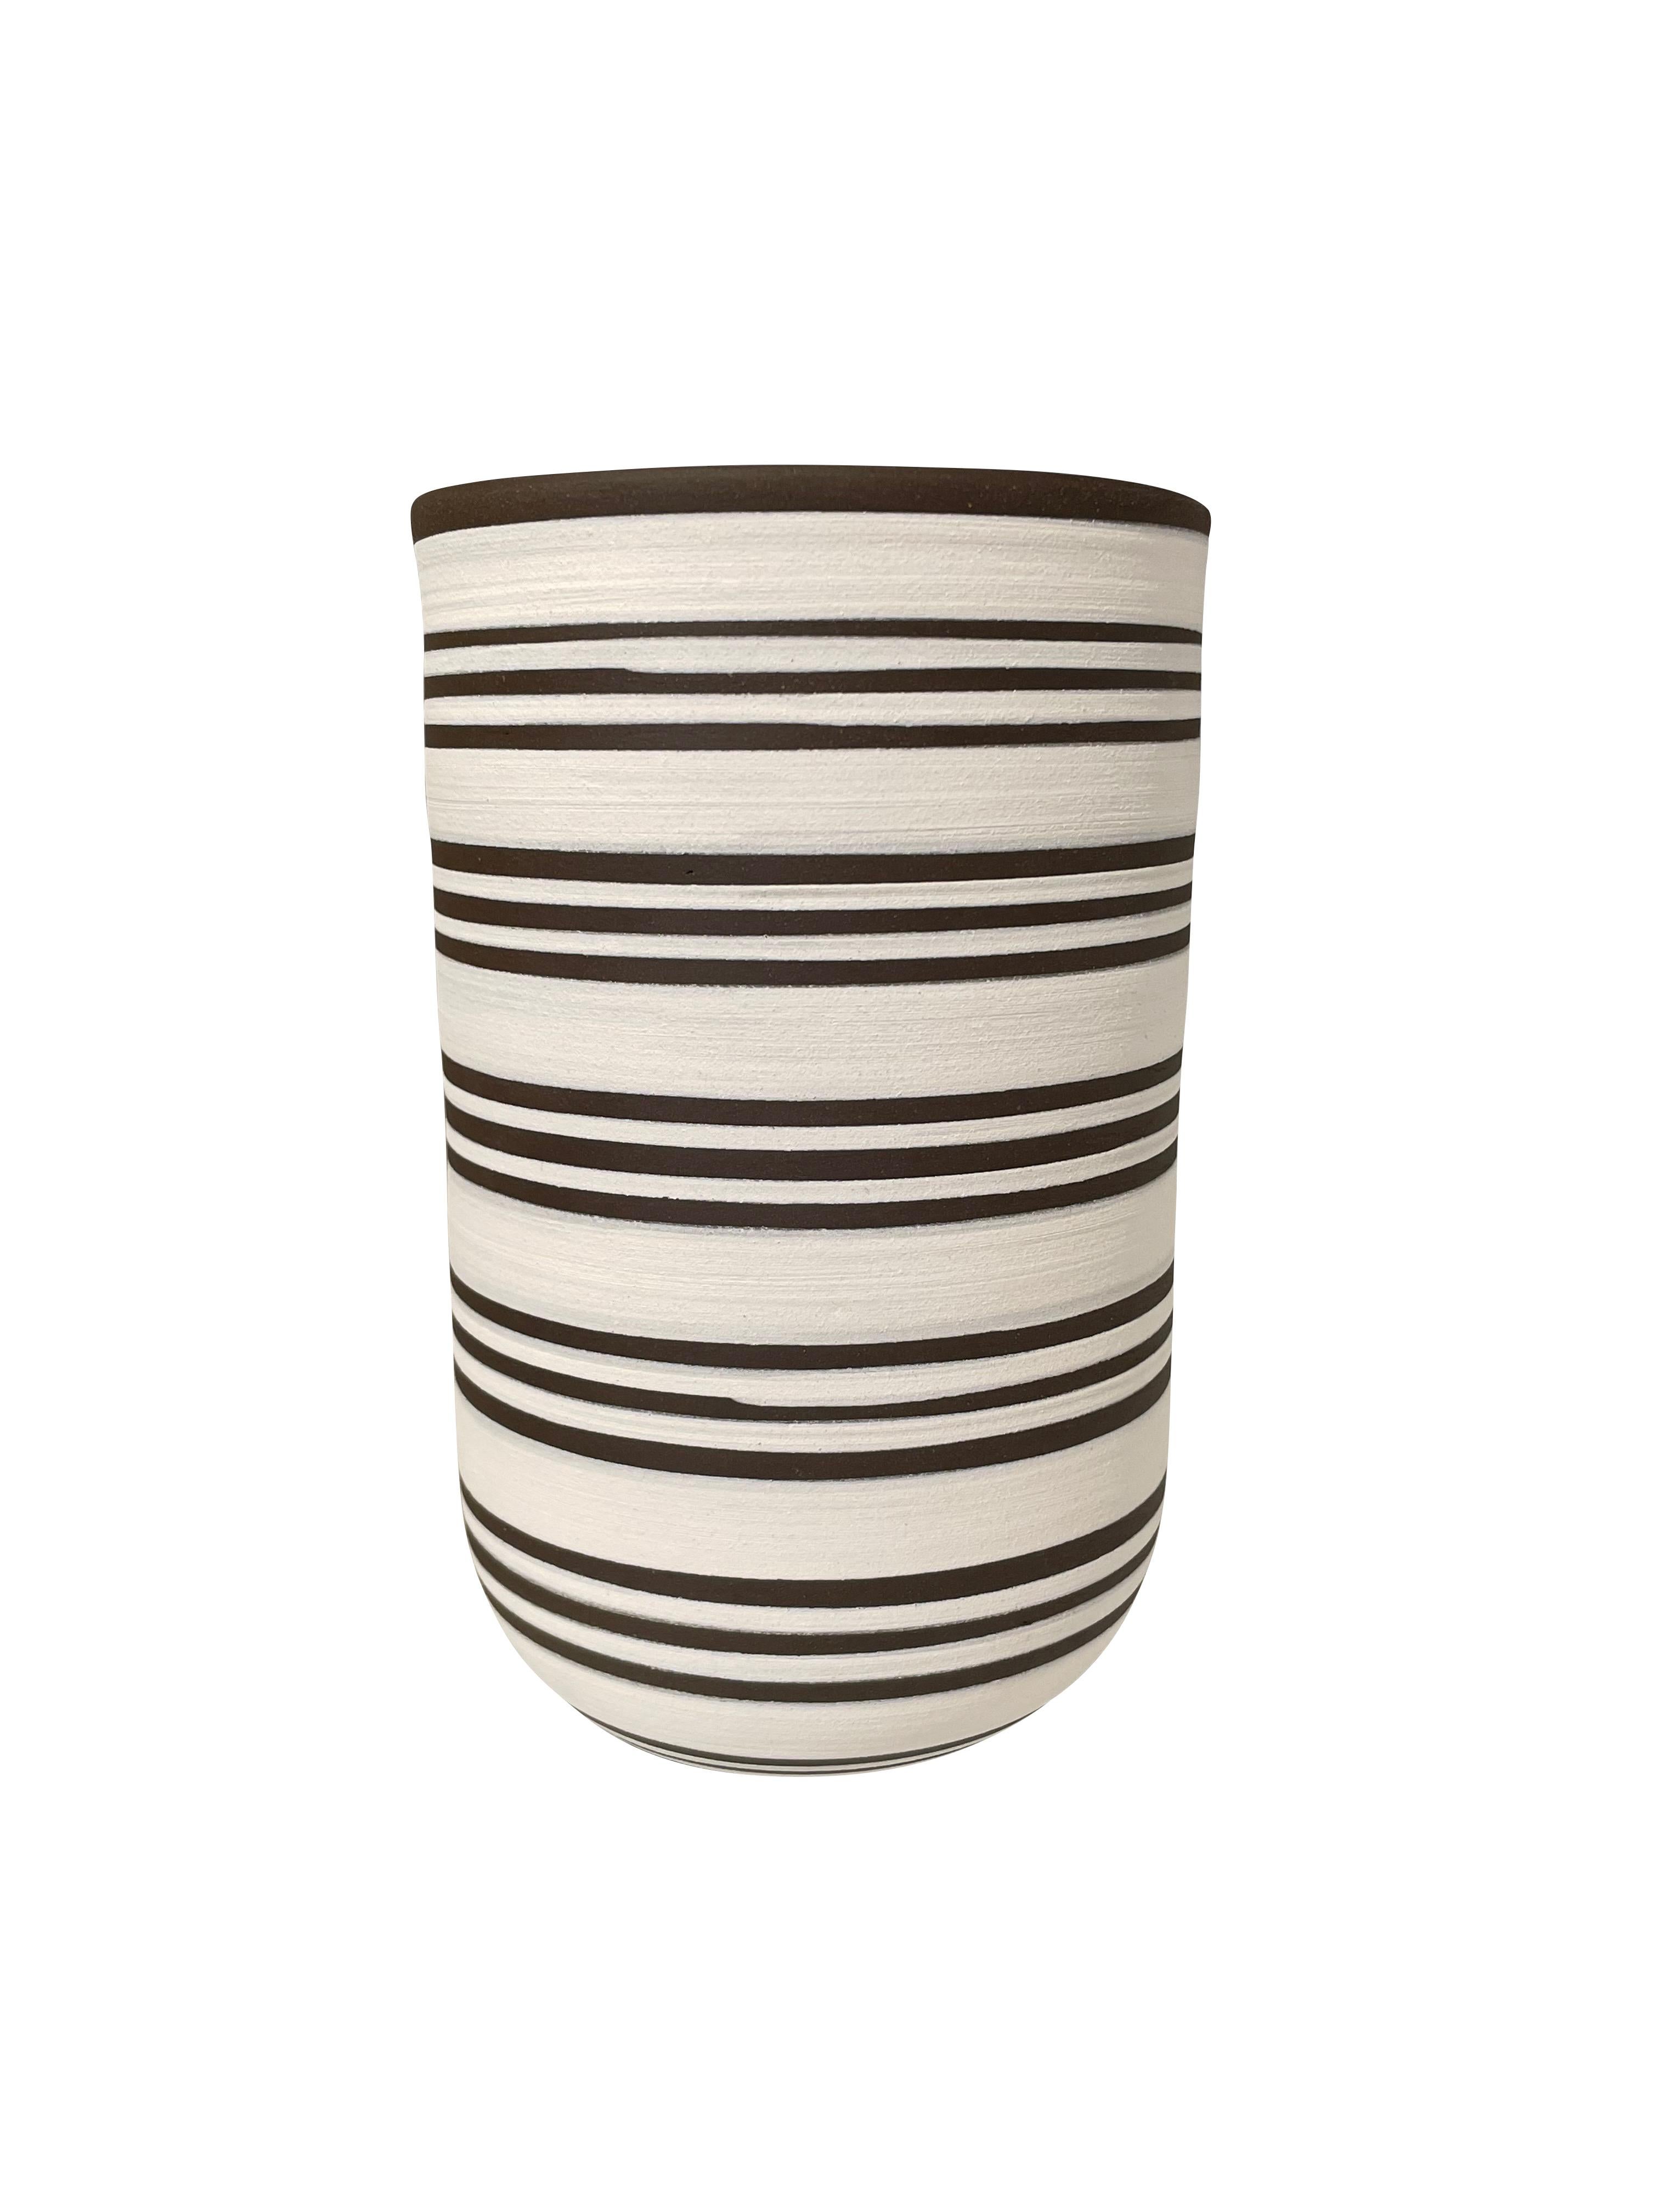 Contemporary Turkish tall white ground ceramic vase with dark brown triple stripes.
Wide mouth opening.
Can hold water.
